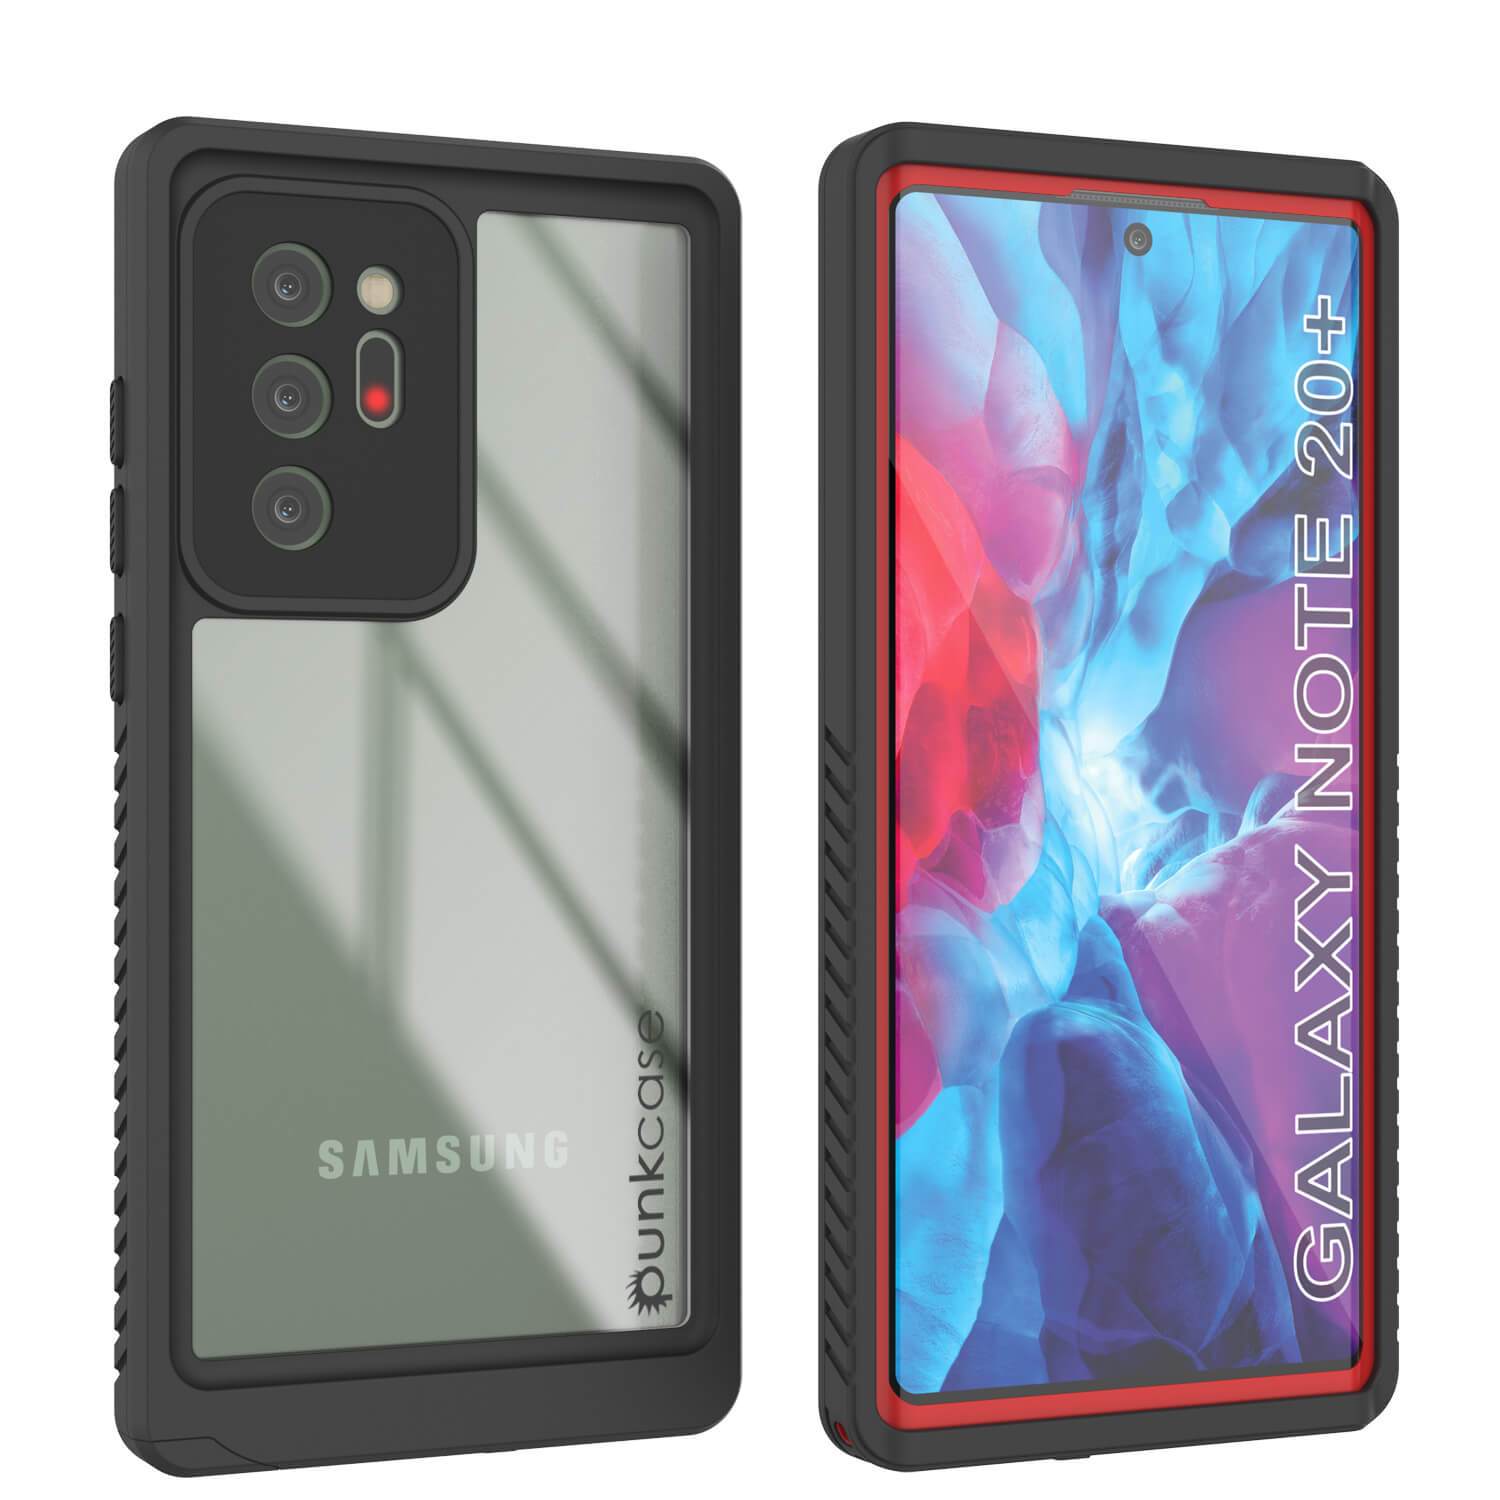 Galaxy Note 20 Ultra Case, Punkcase [Extreme Series] Armor Cover W/ Built In Screen Protector [Red]